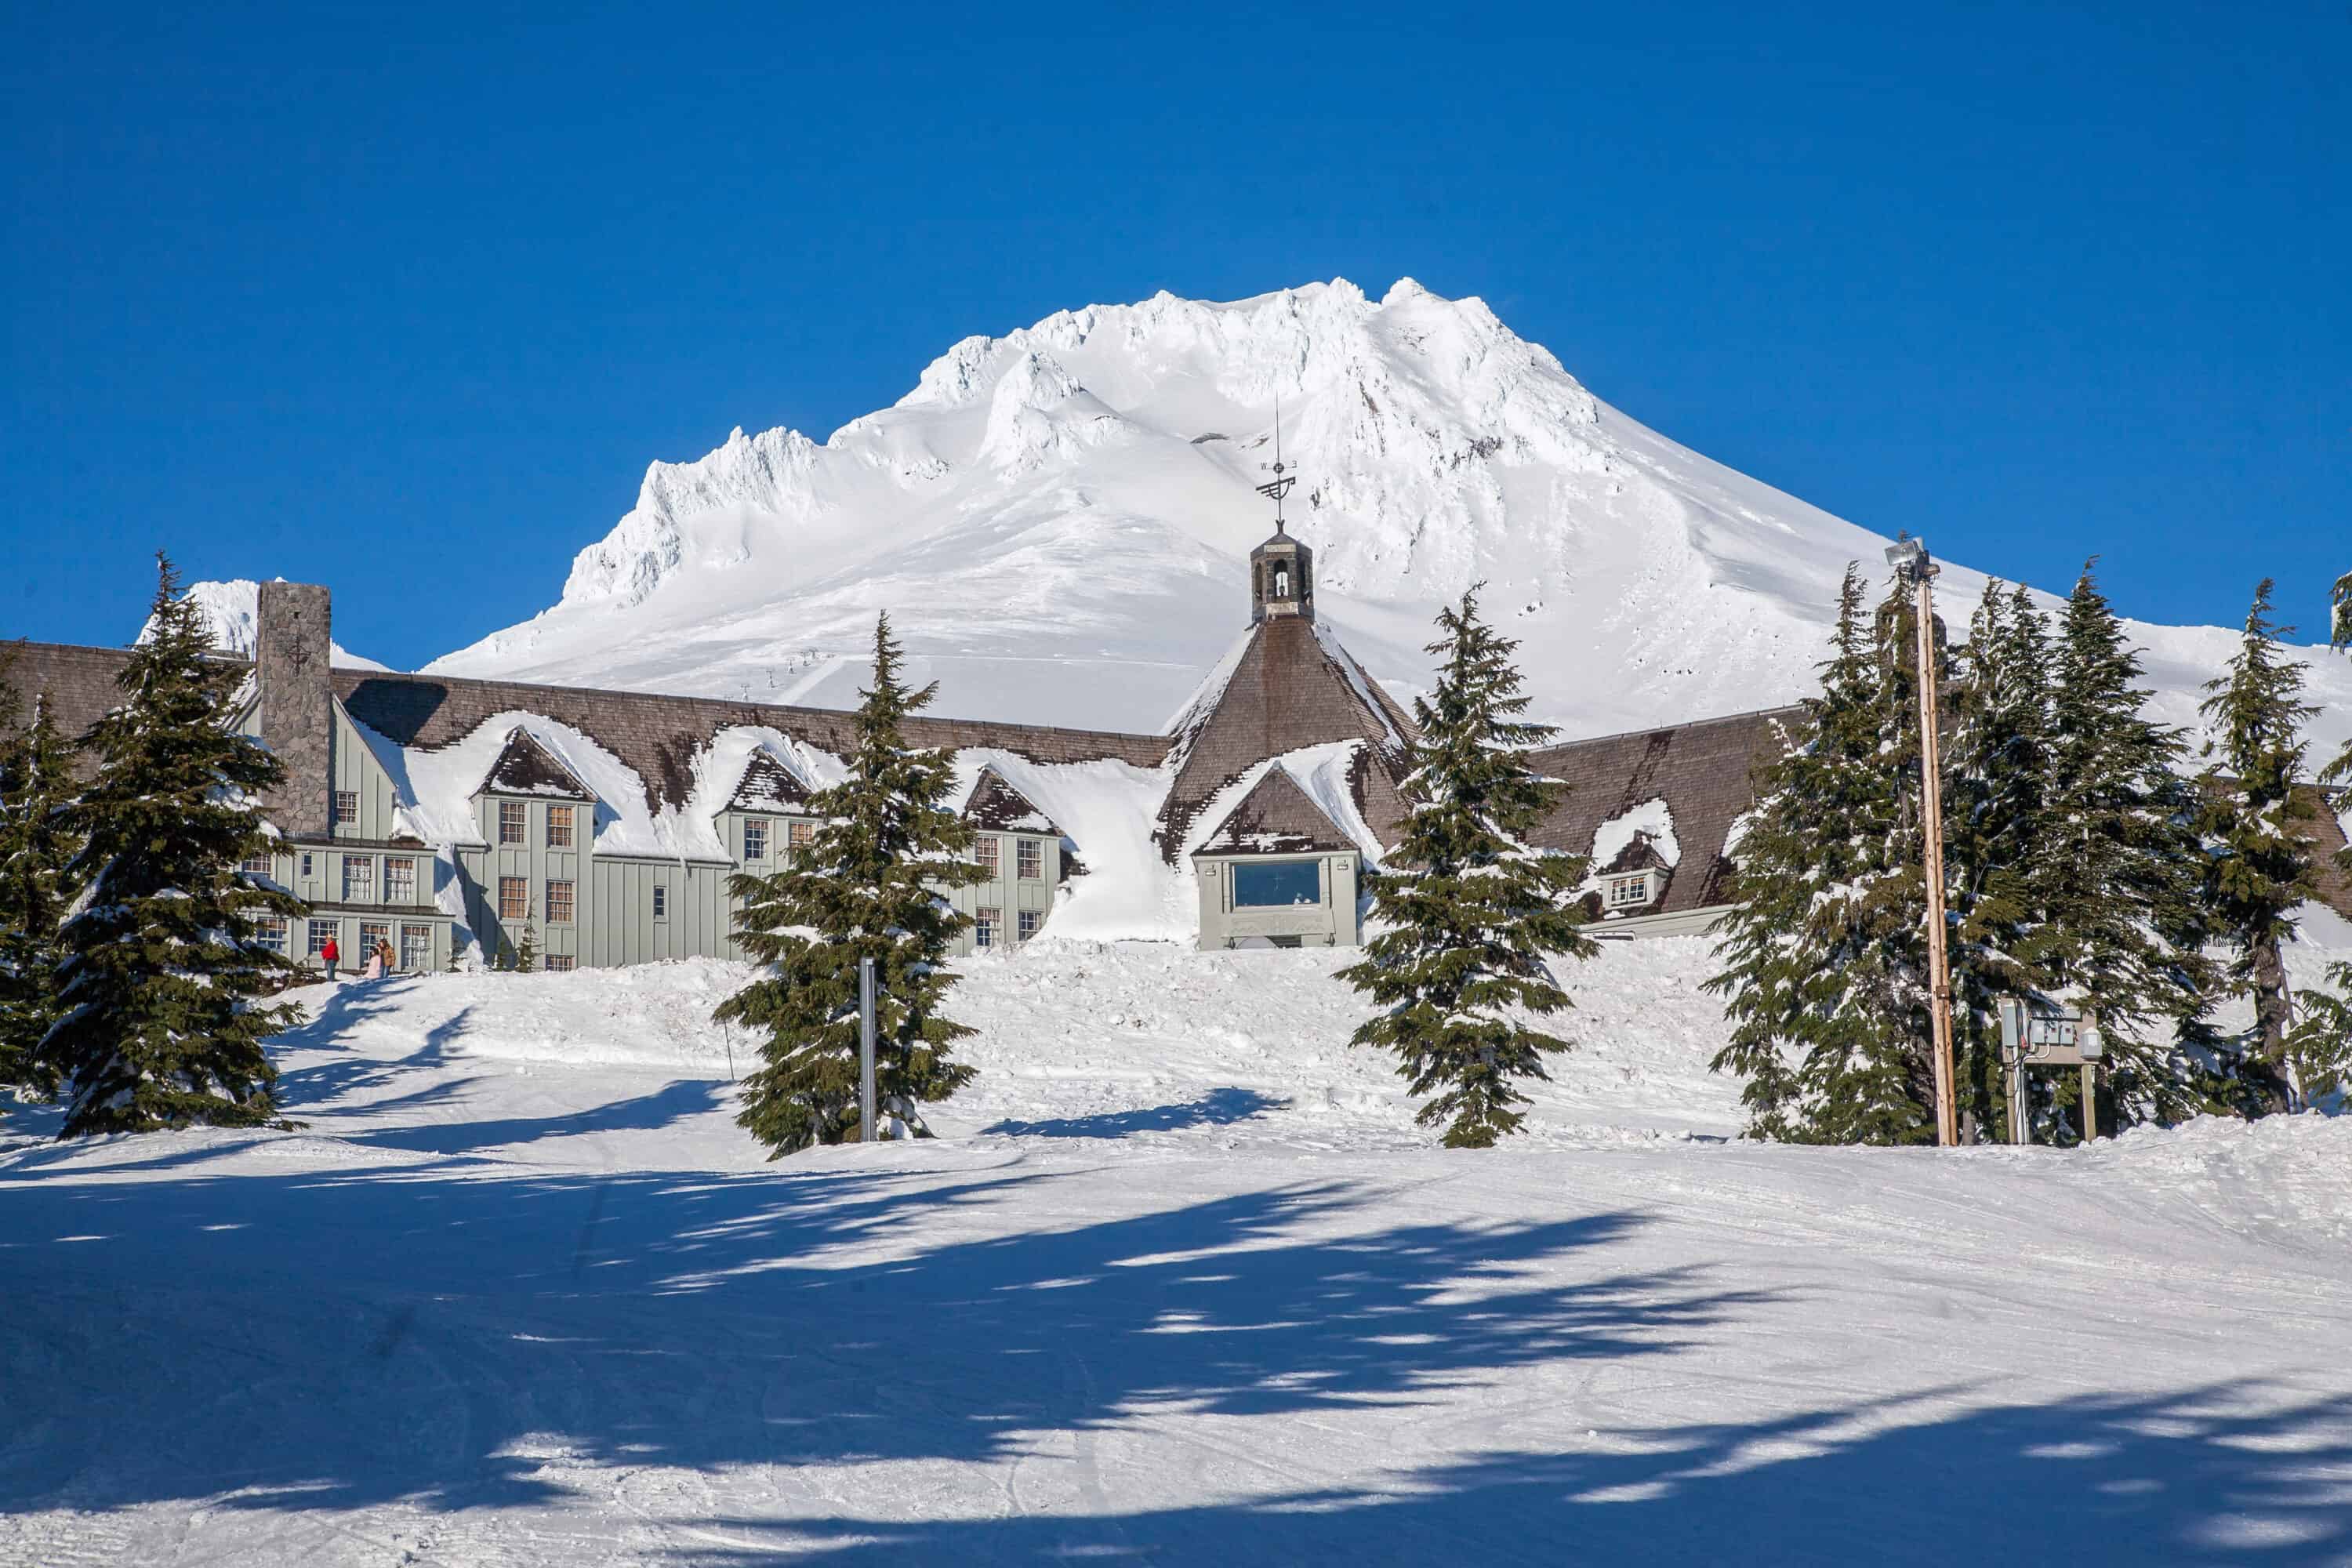 A snowy Timberline Lodge in Oregon where the Shining was filmed with a snowy mountain in the background. 